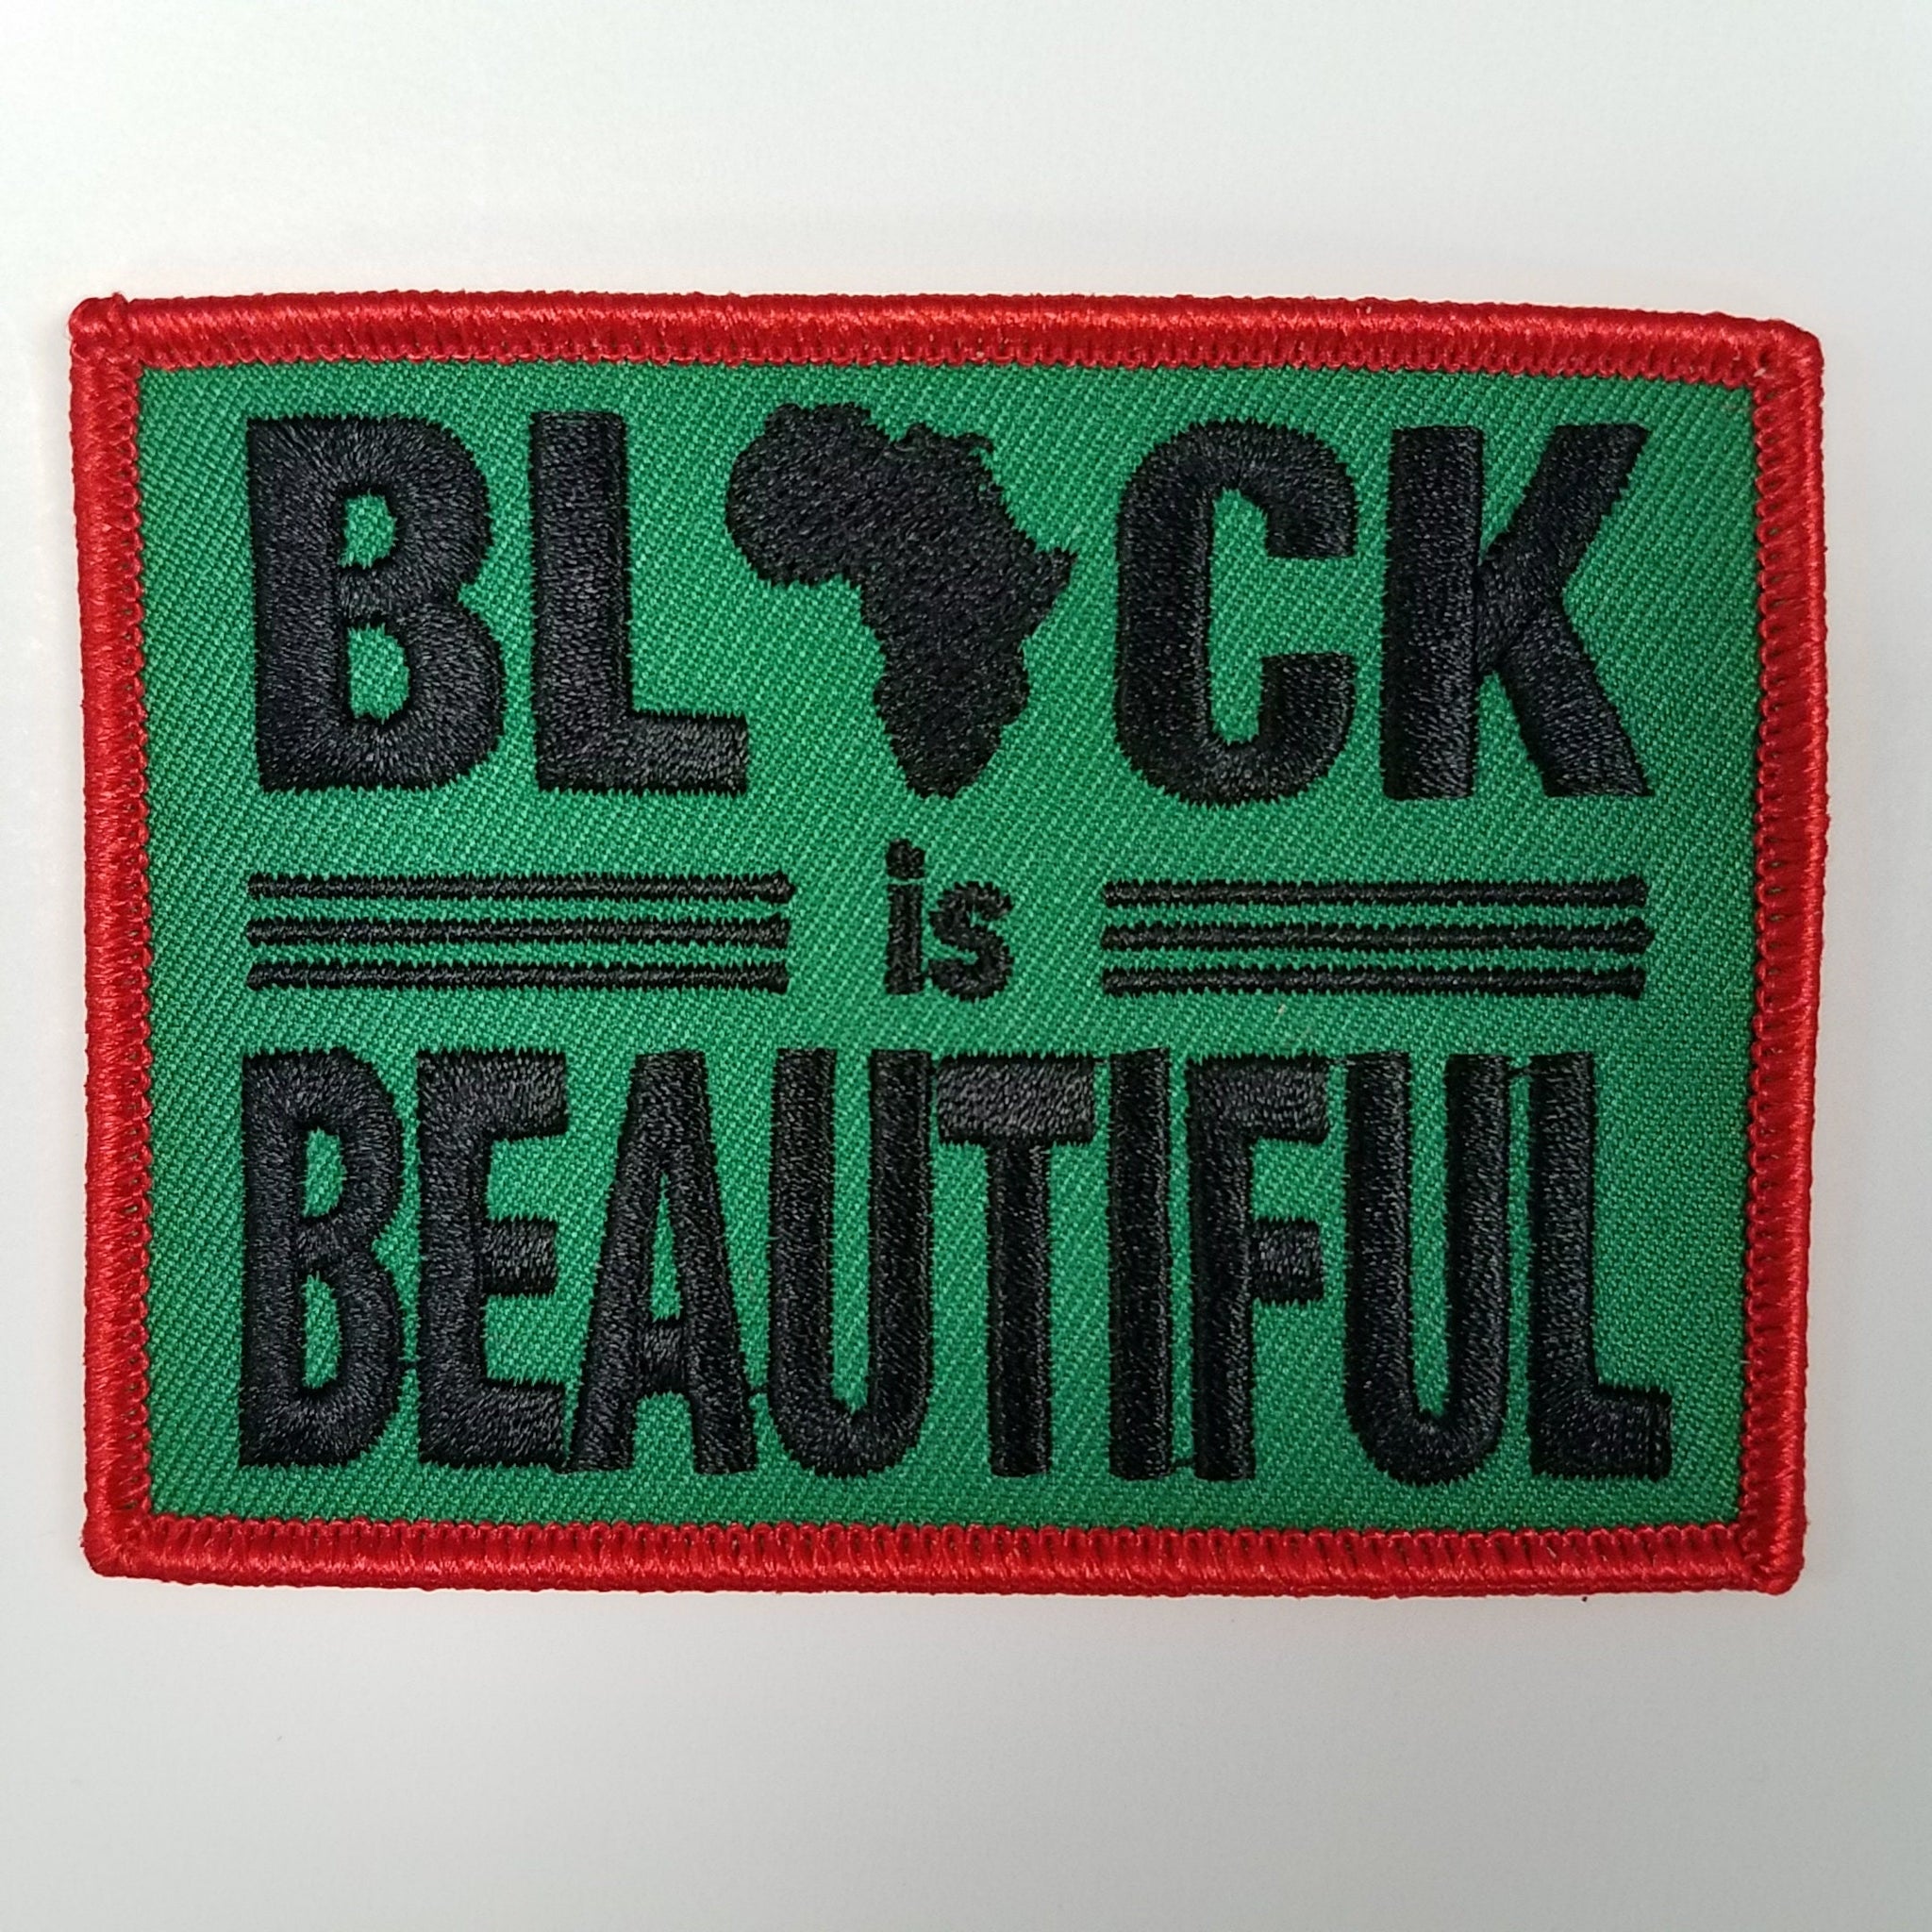 Curly Girl Embroidered Patch Cute Patches African Girl Patches Tiny Patches  Embroidery Design Black Woman Mini Patches Iron On Patch ZZ8731